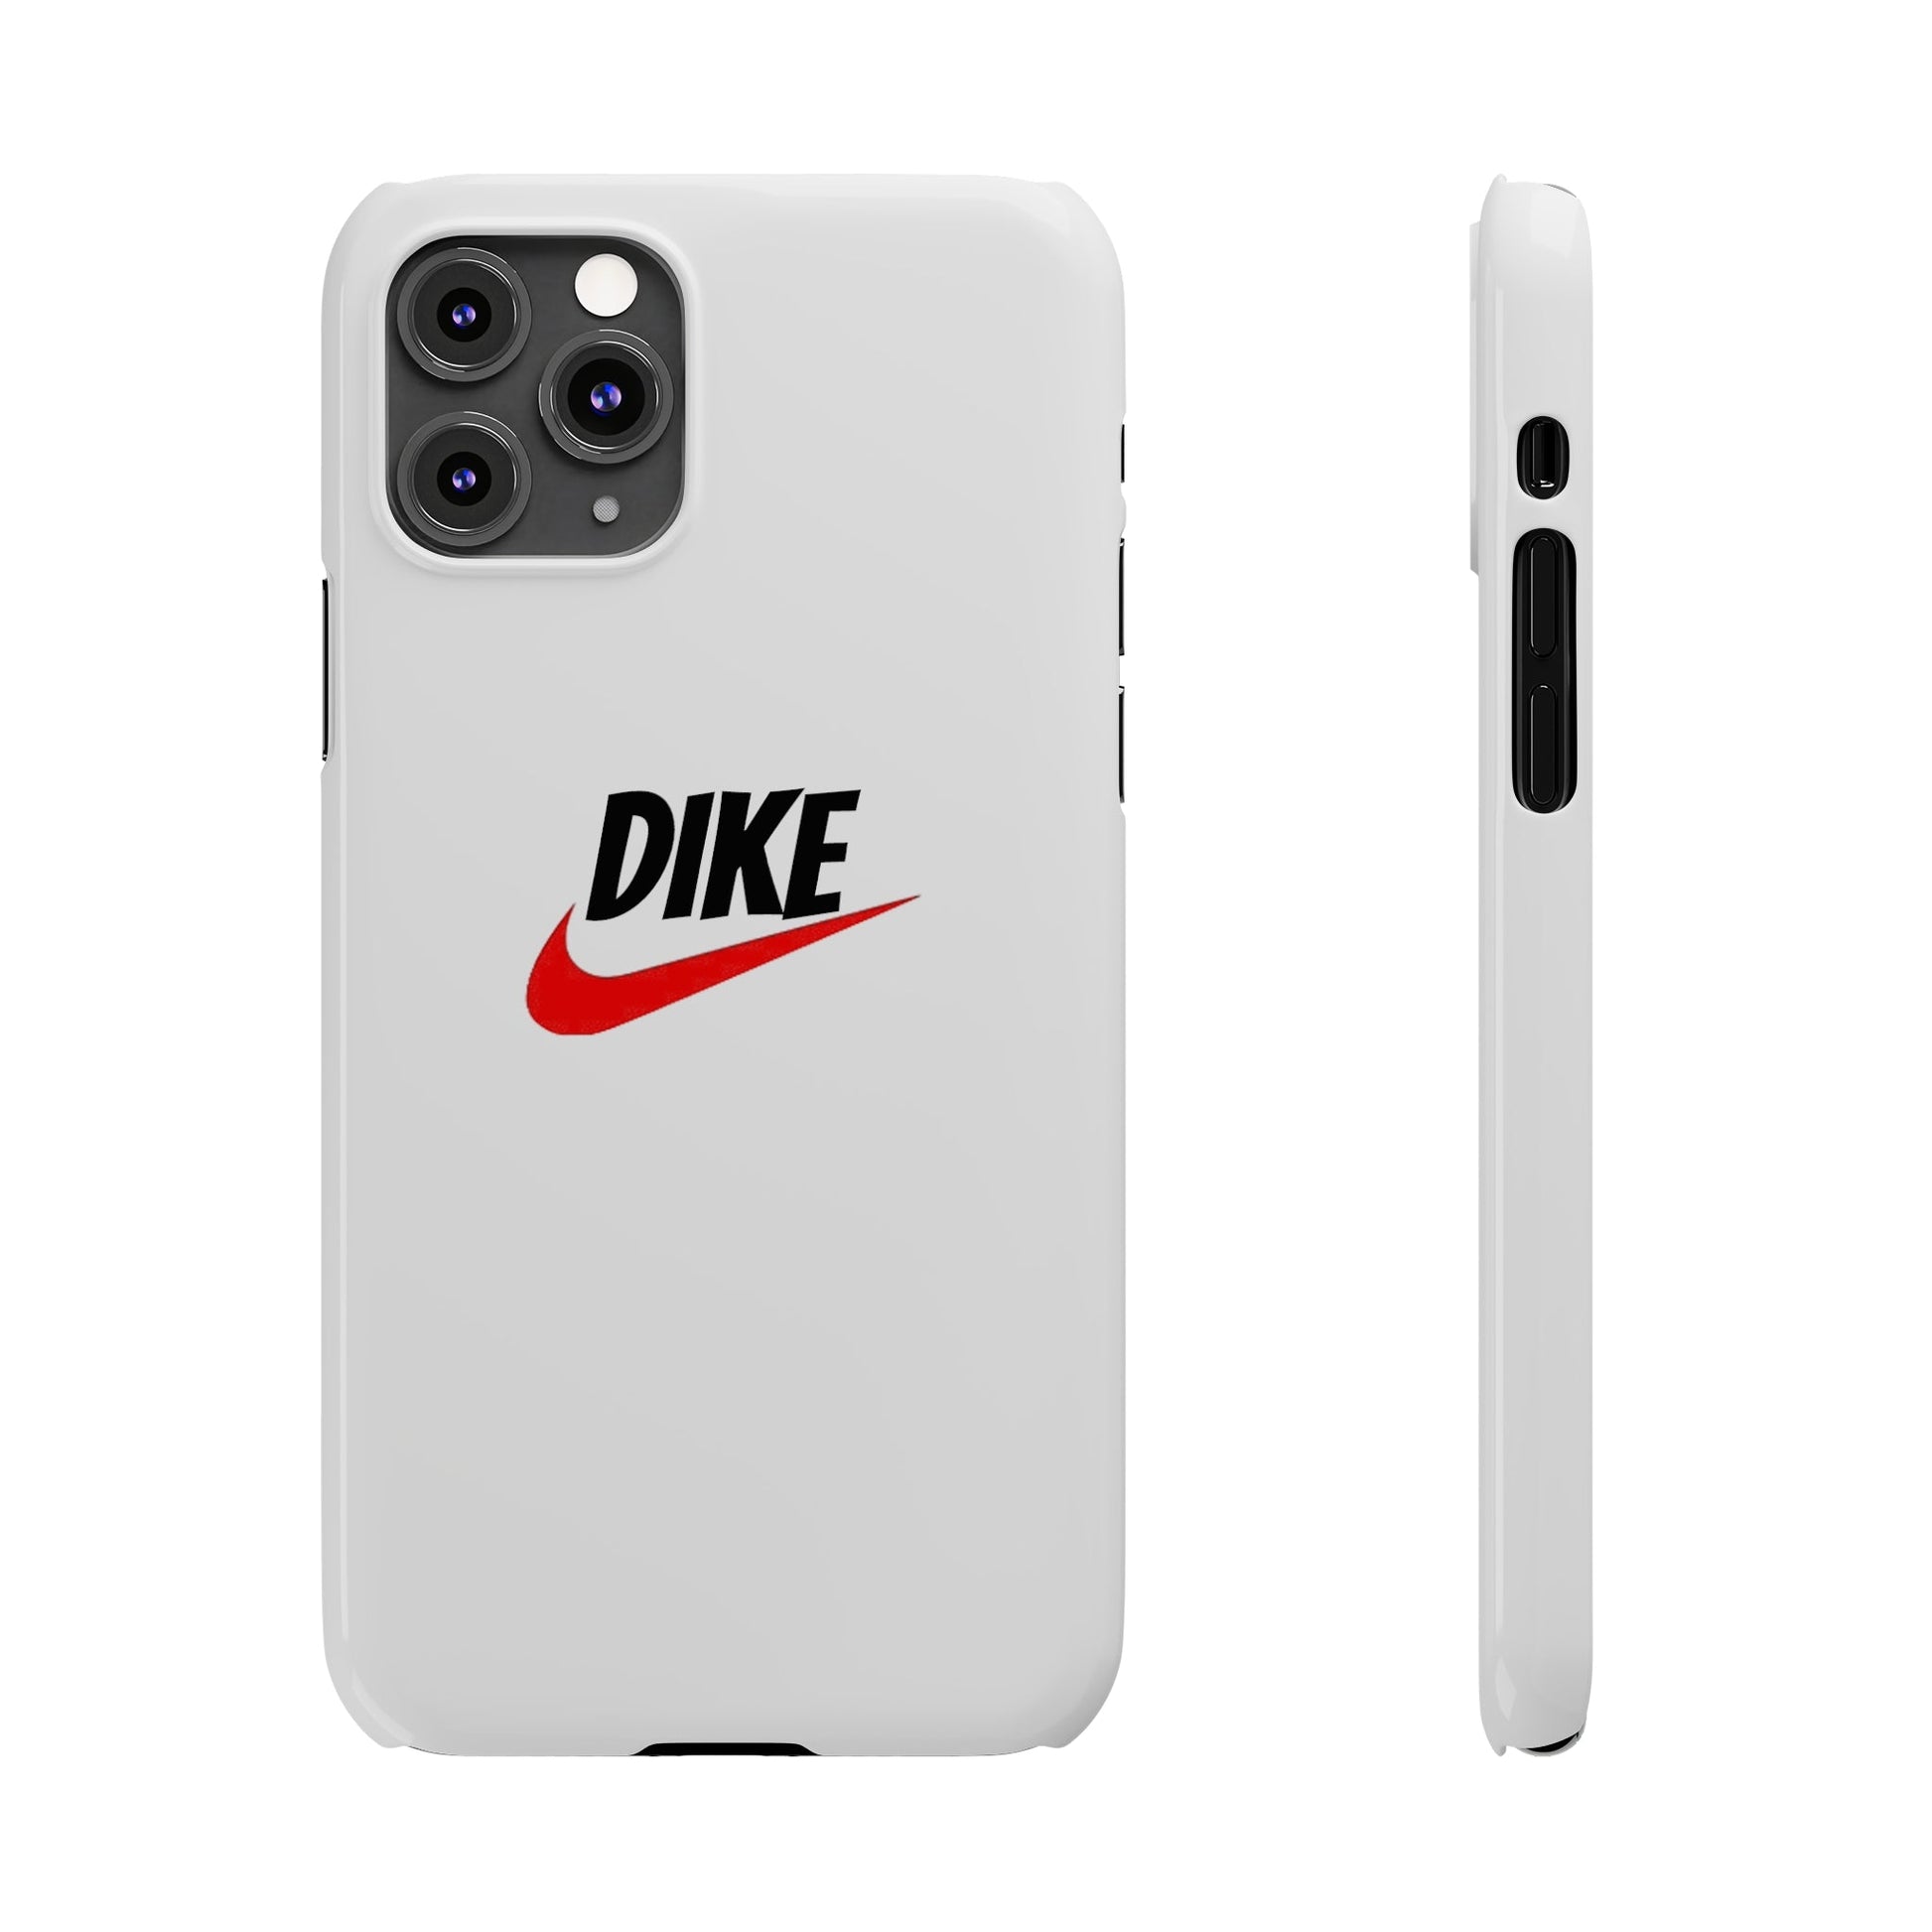 "Dike" MagStrong Phone Cases iPhone 11 Pro